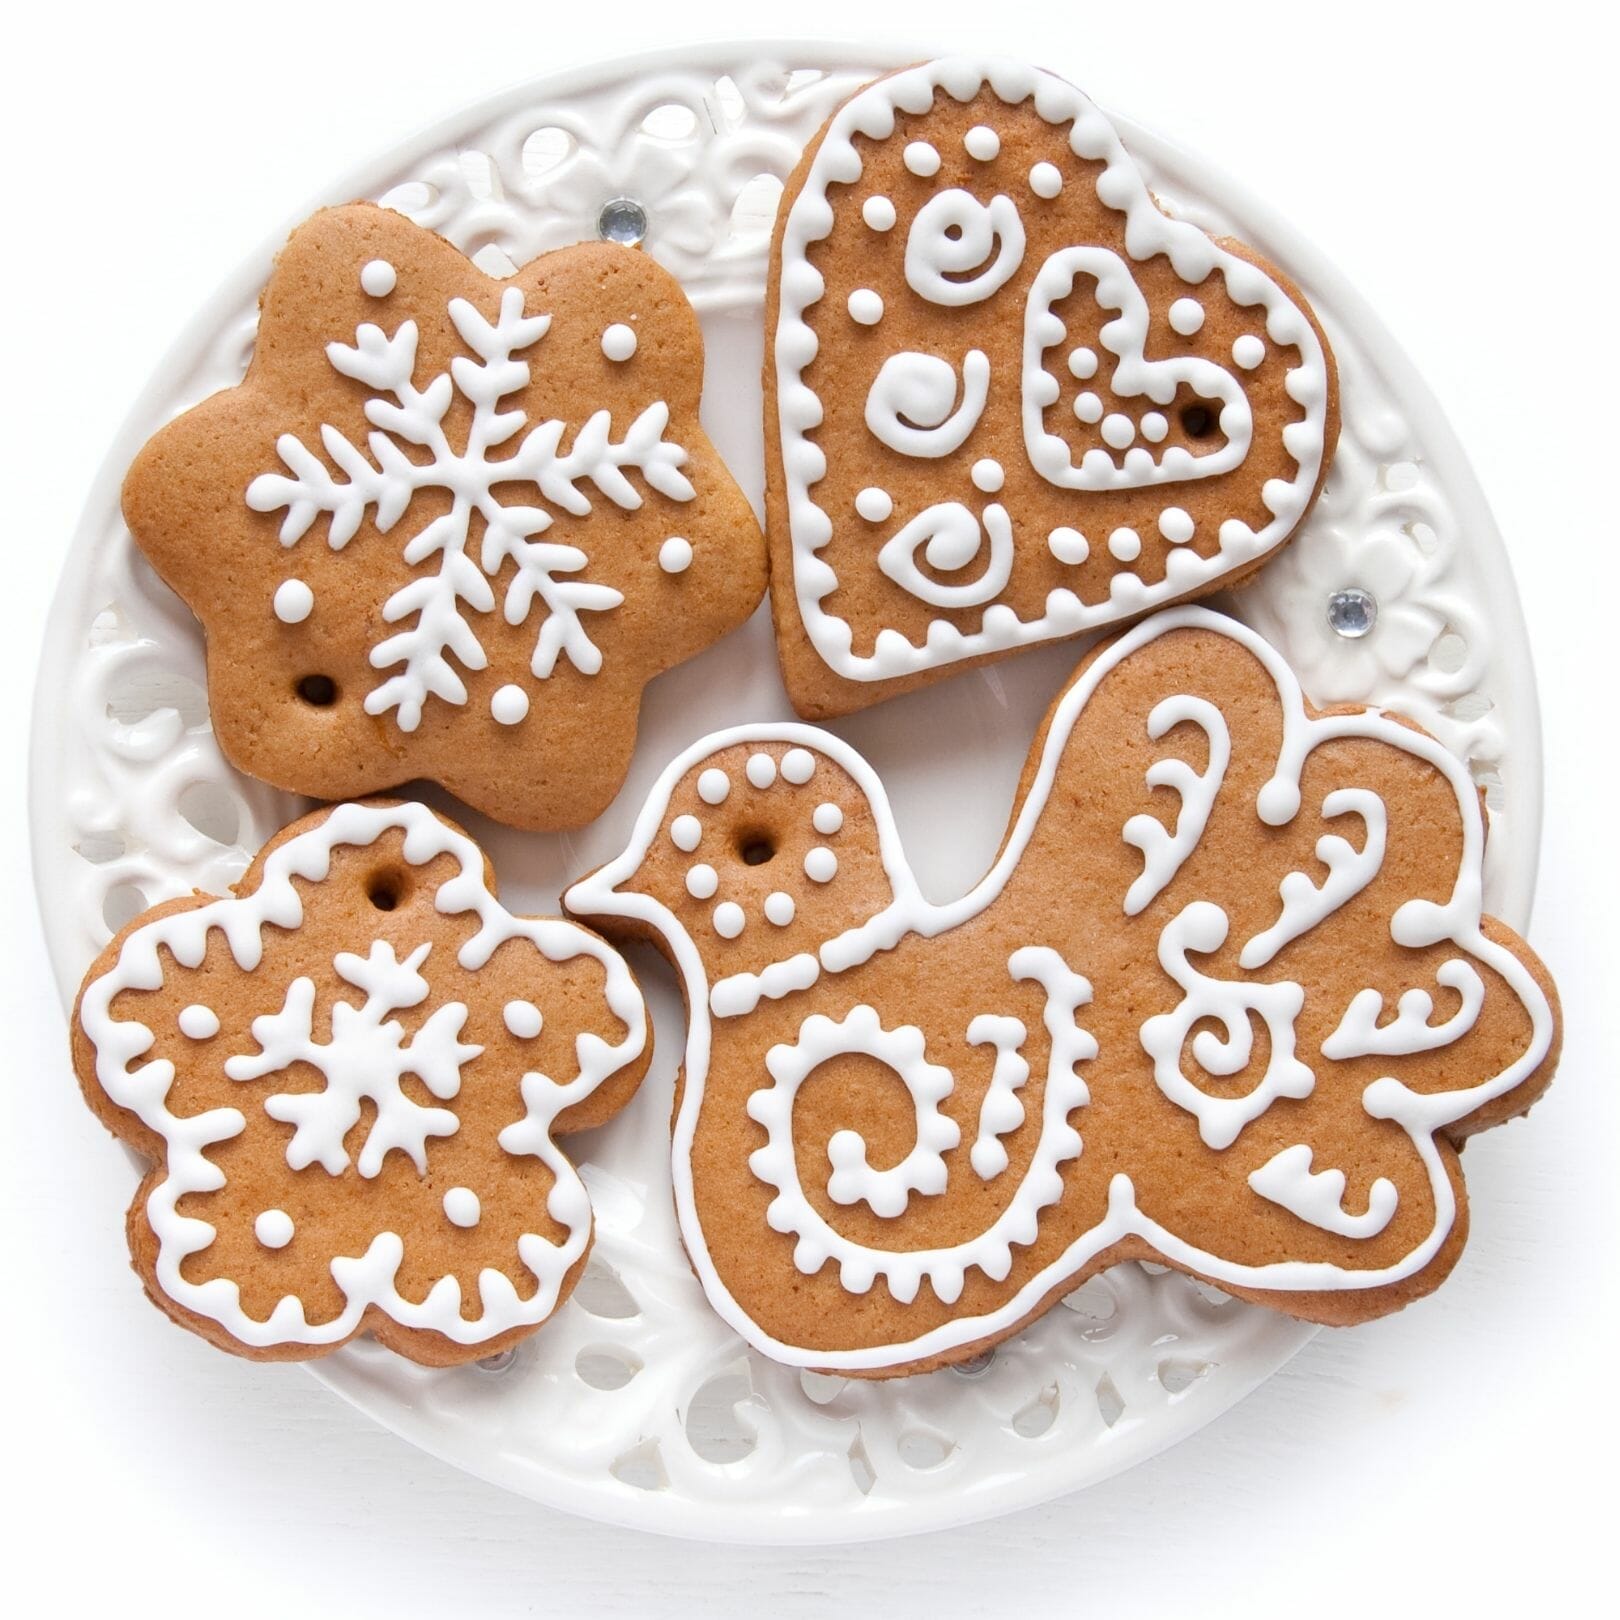 white icing decorated chocolate gingerbread cookies spread on circular plate